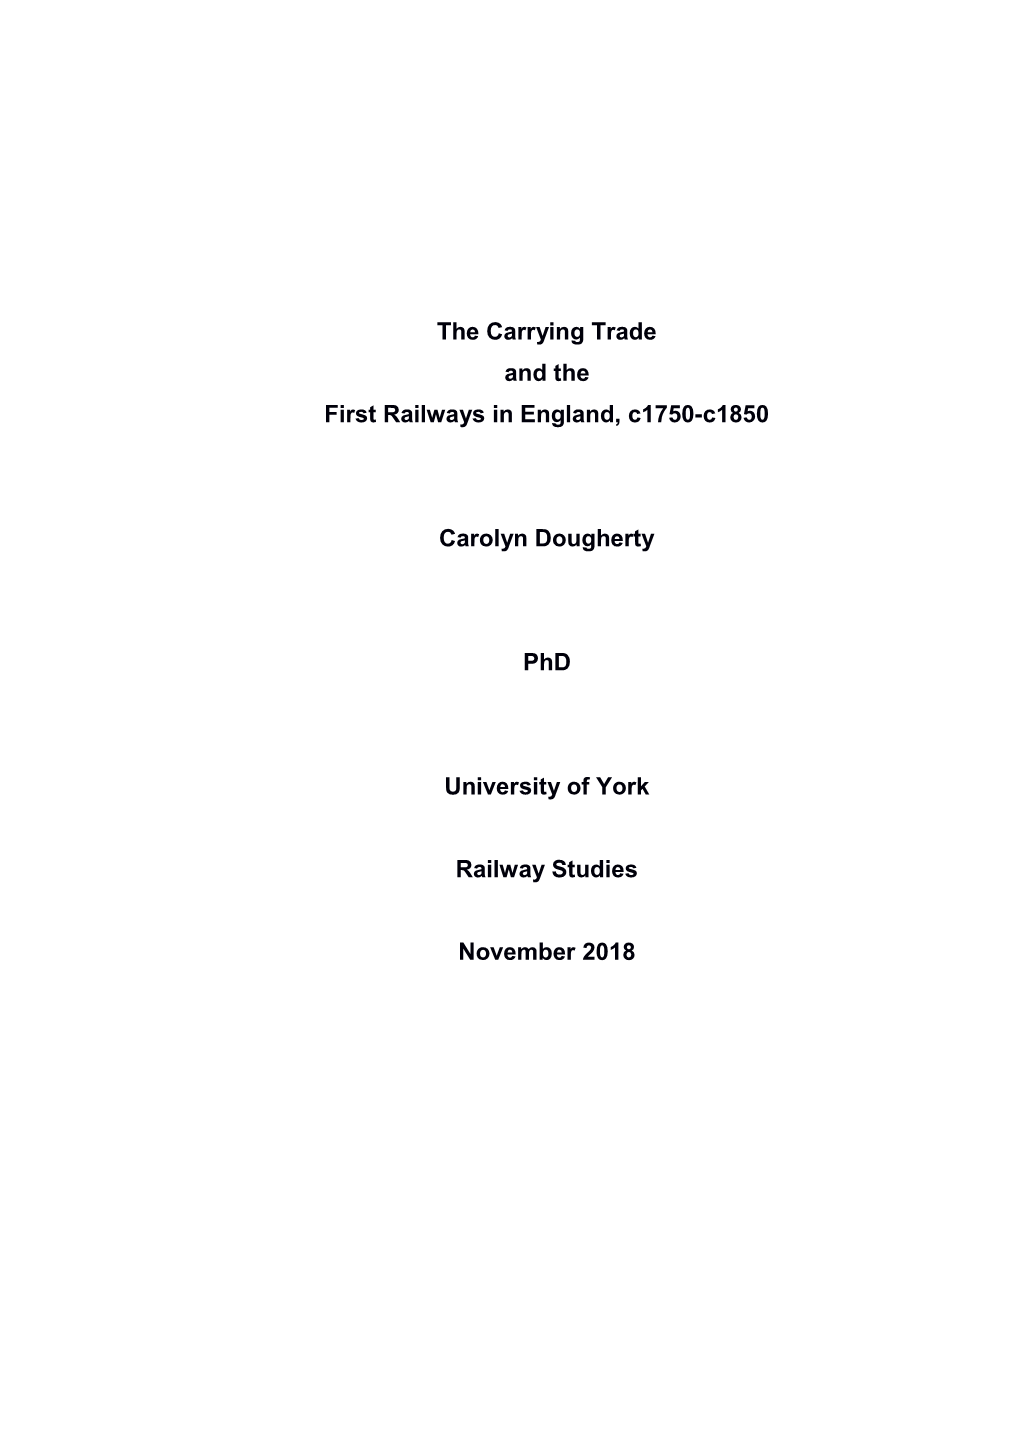 The Carrying Trade and the First Railways in England, C1750-C1850